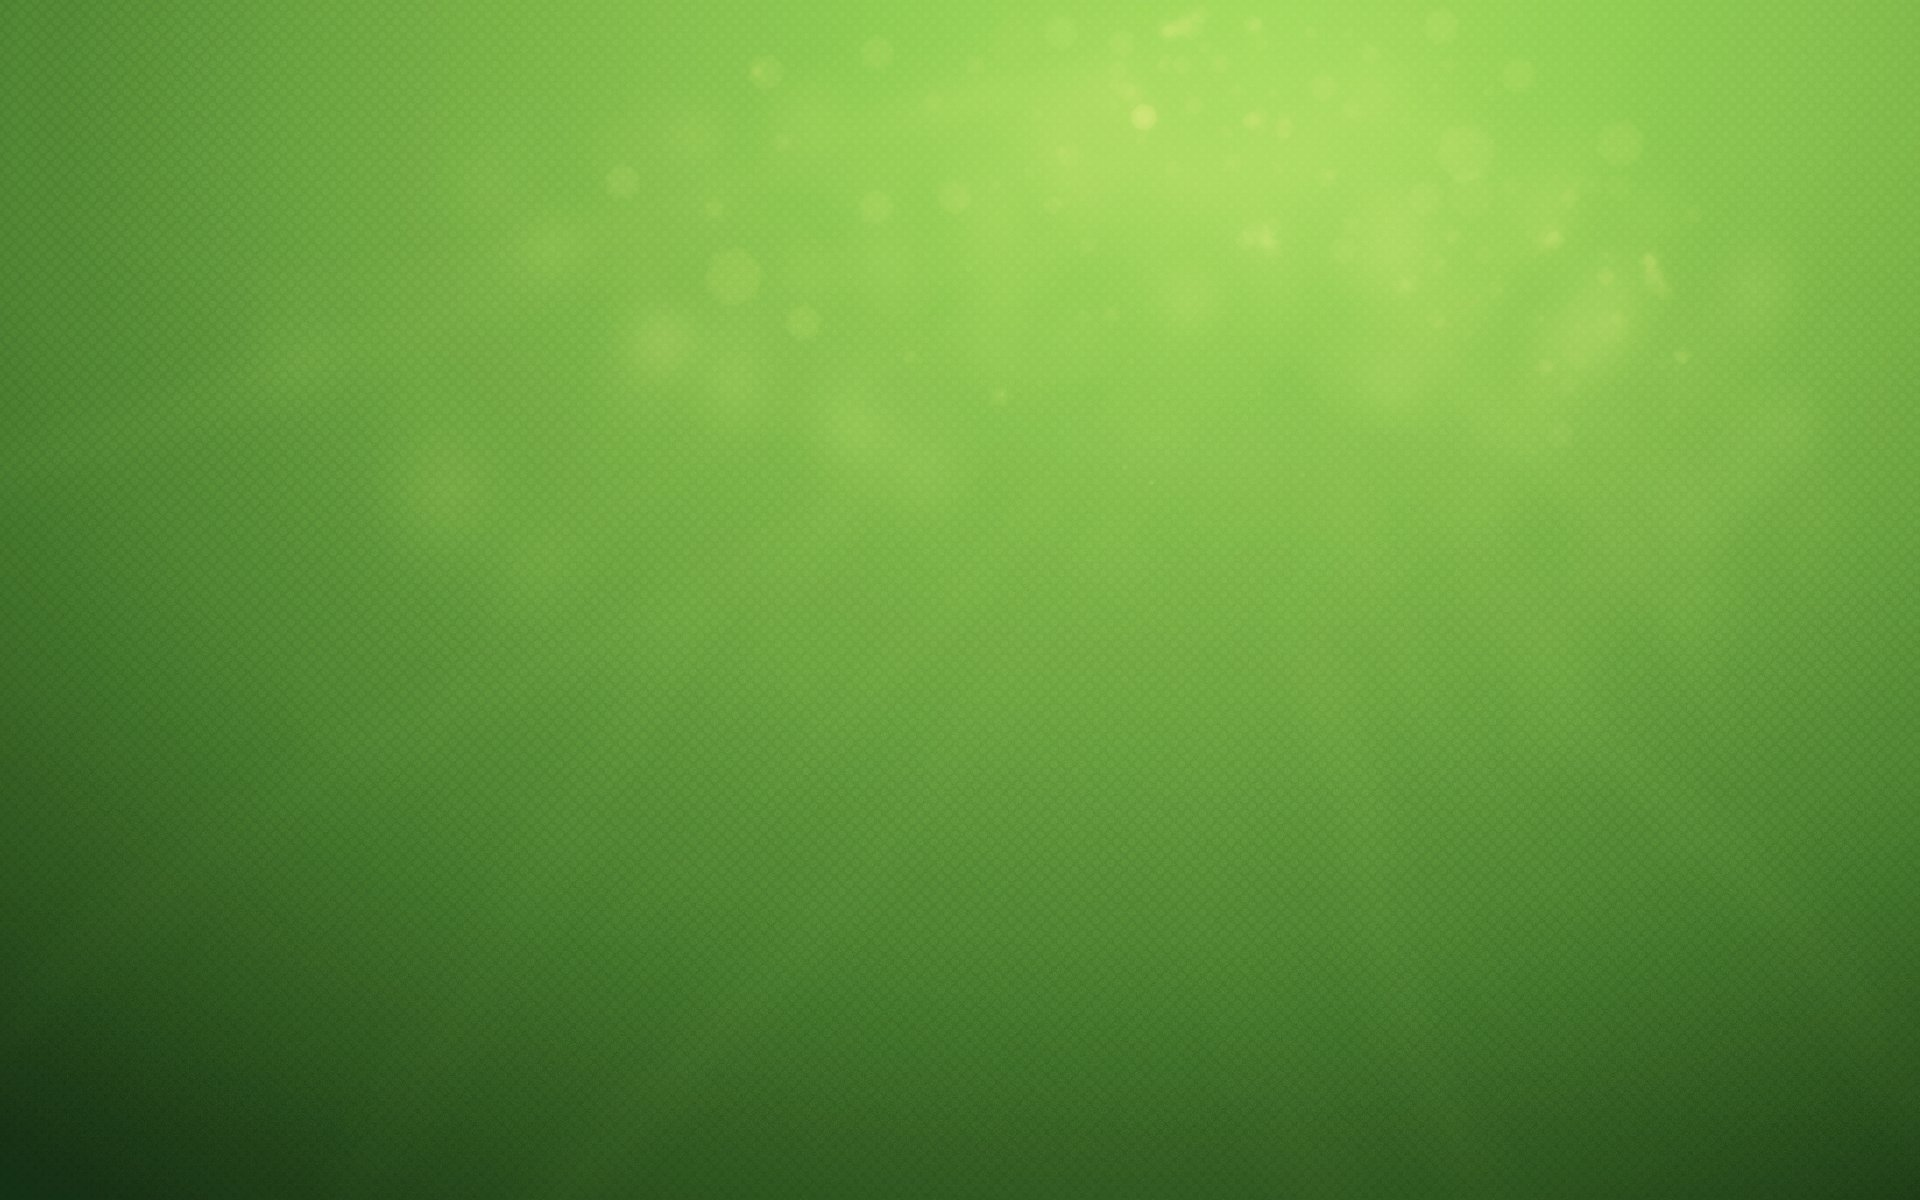 OpenSUSE 12.2 1920x1200.png